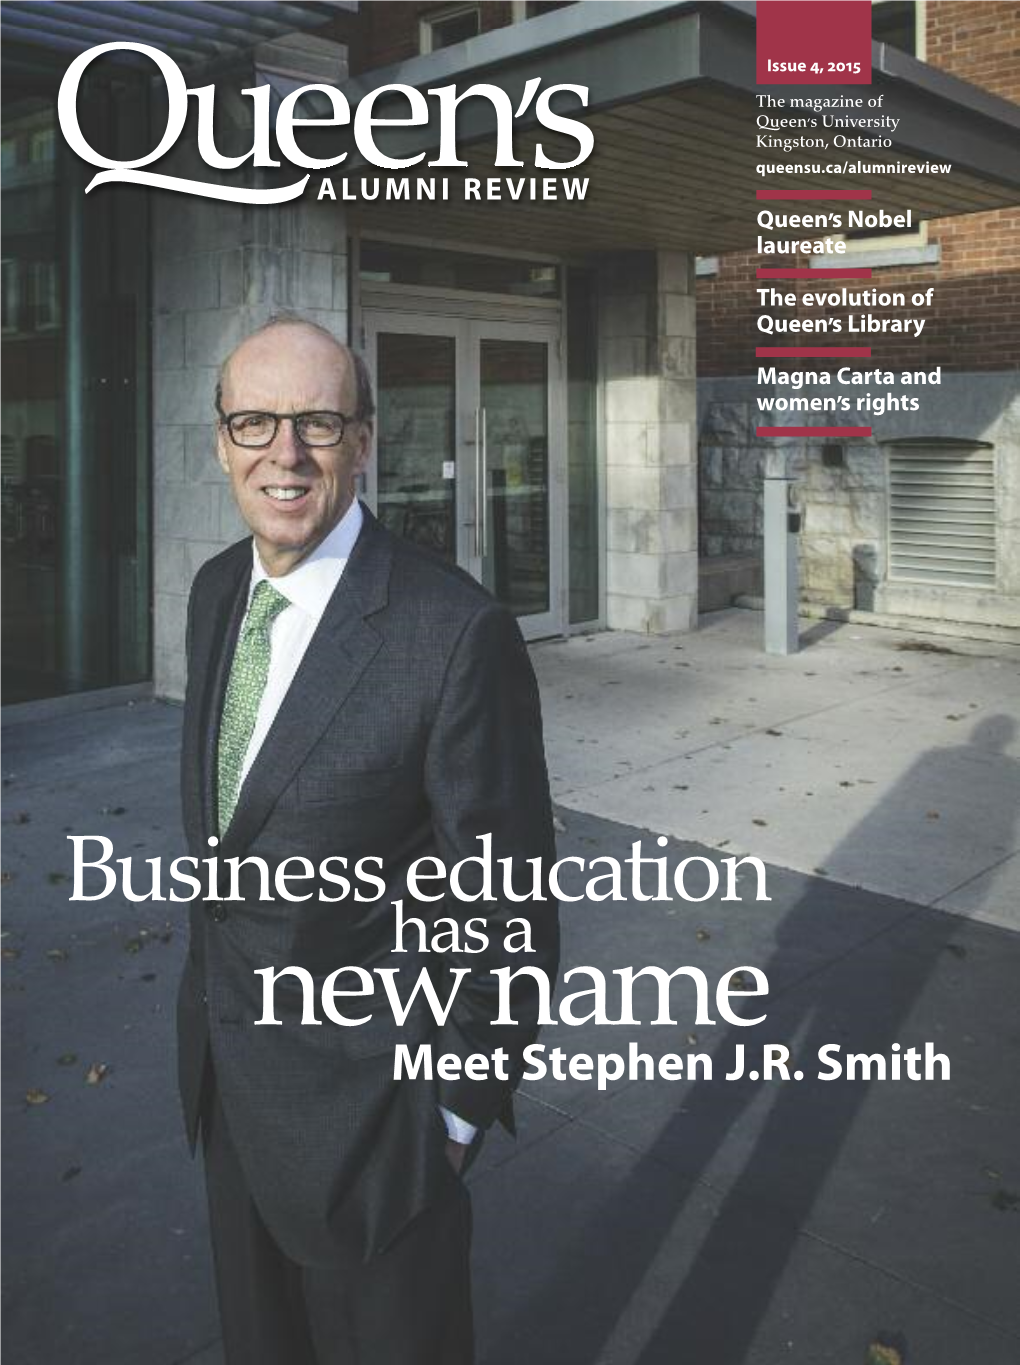 Business Education Has a New Name 26 “It Isn’T What We Say Or Think That Defines Us, but What We Do.” Keeping in Touch Jane Austen, J DGJD @GC JDGJEAEFEKN on Oct